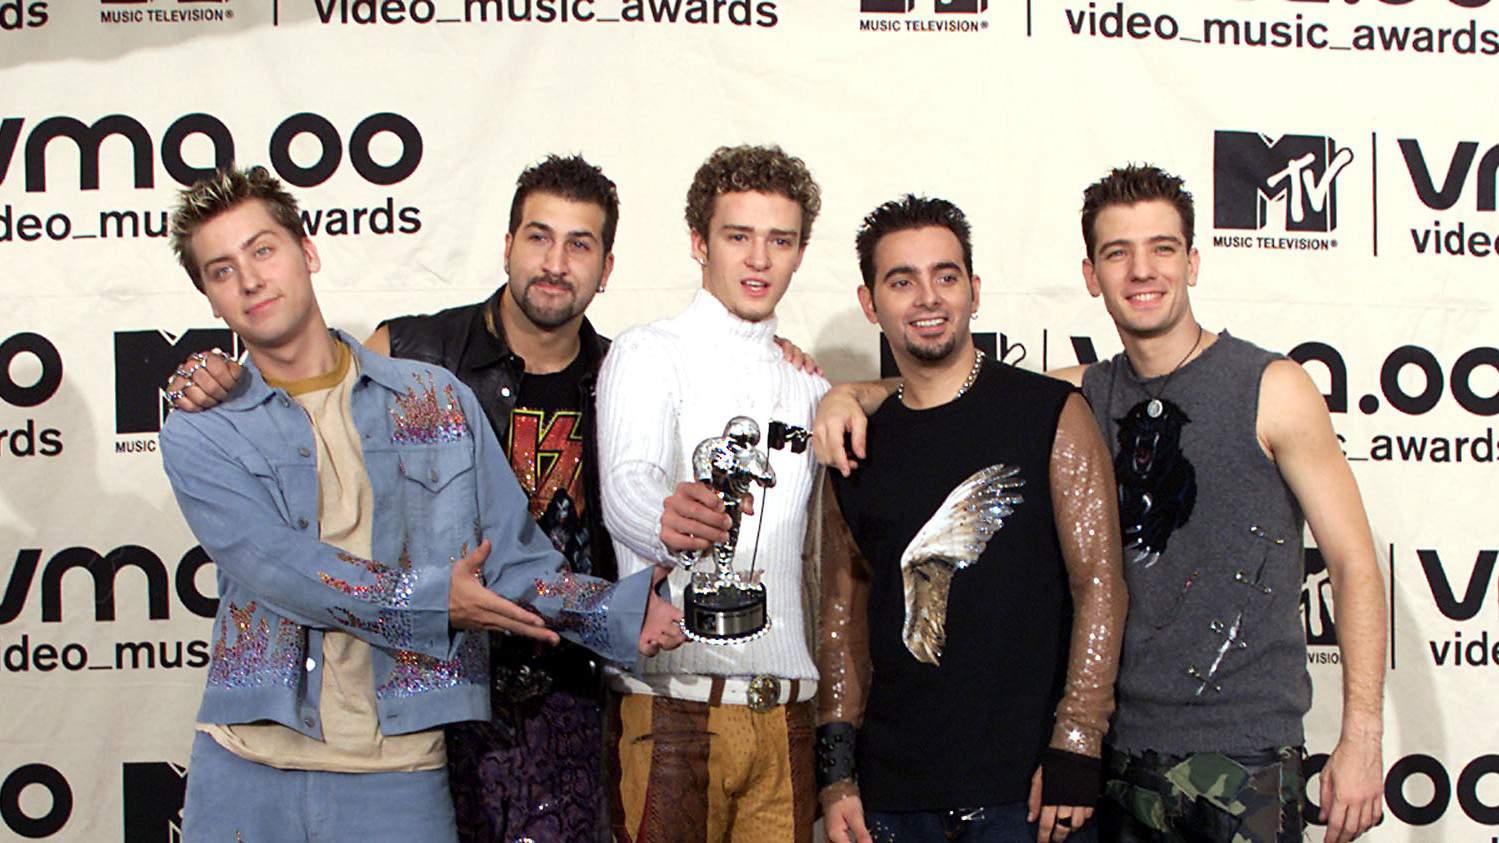 These 15 hit music videos from 2000 will bring on the nostalgia